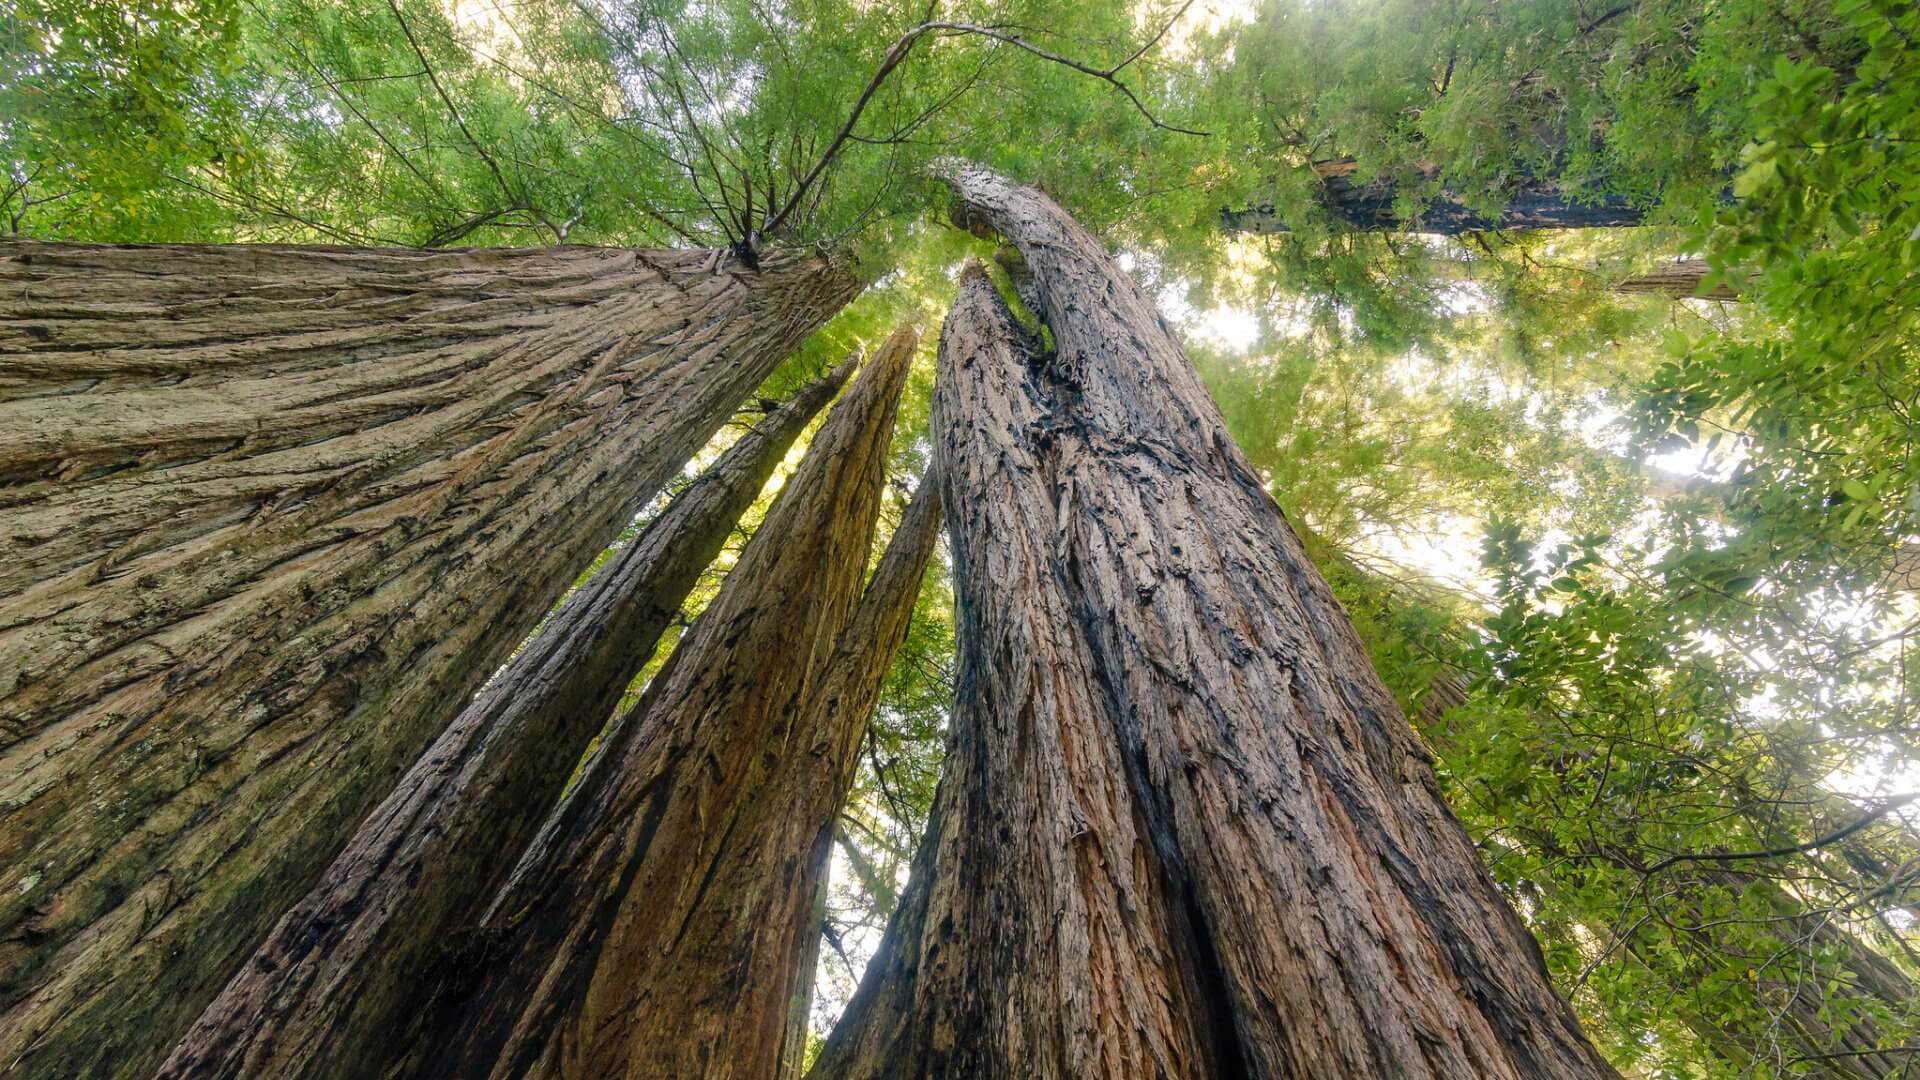 Redwoods at Tall Trees Grove - Redwood National & State Parks